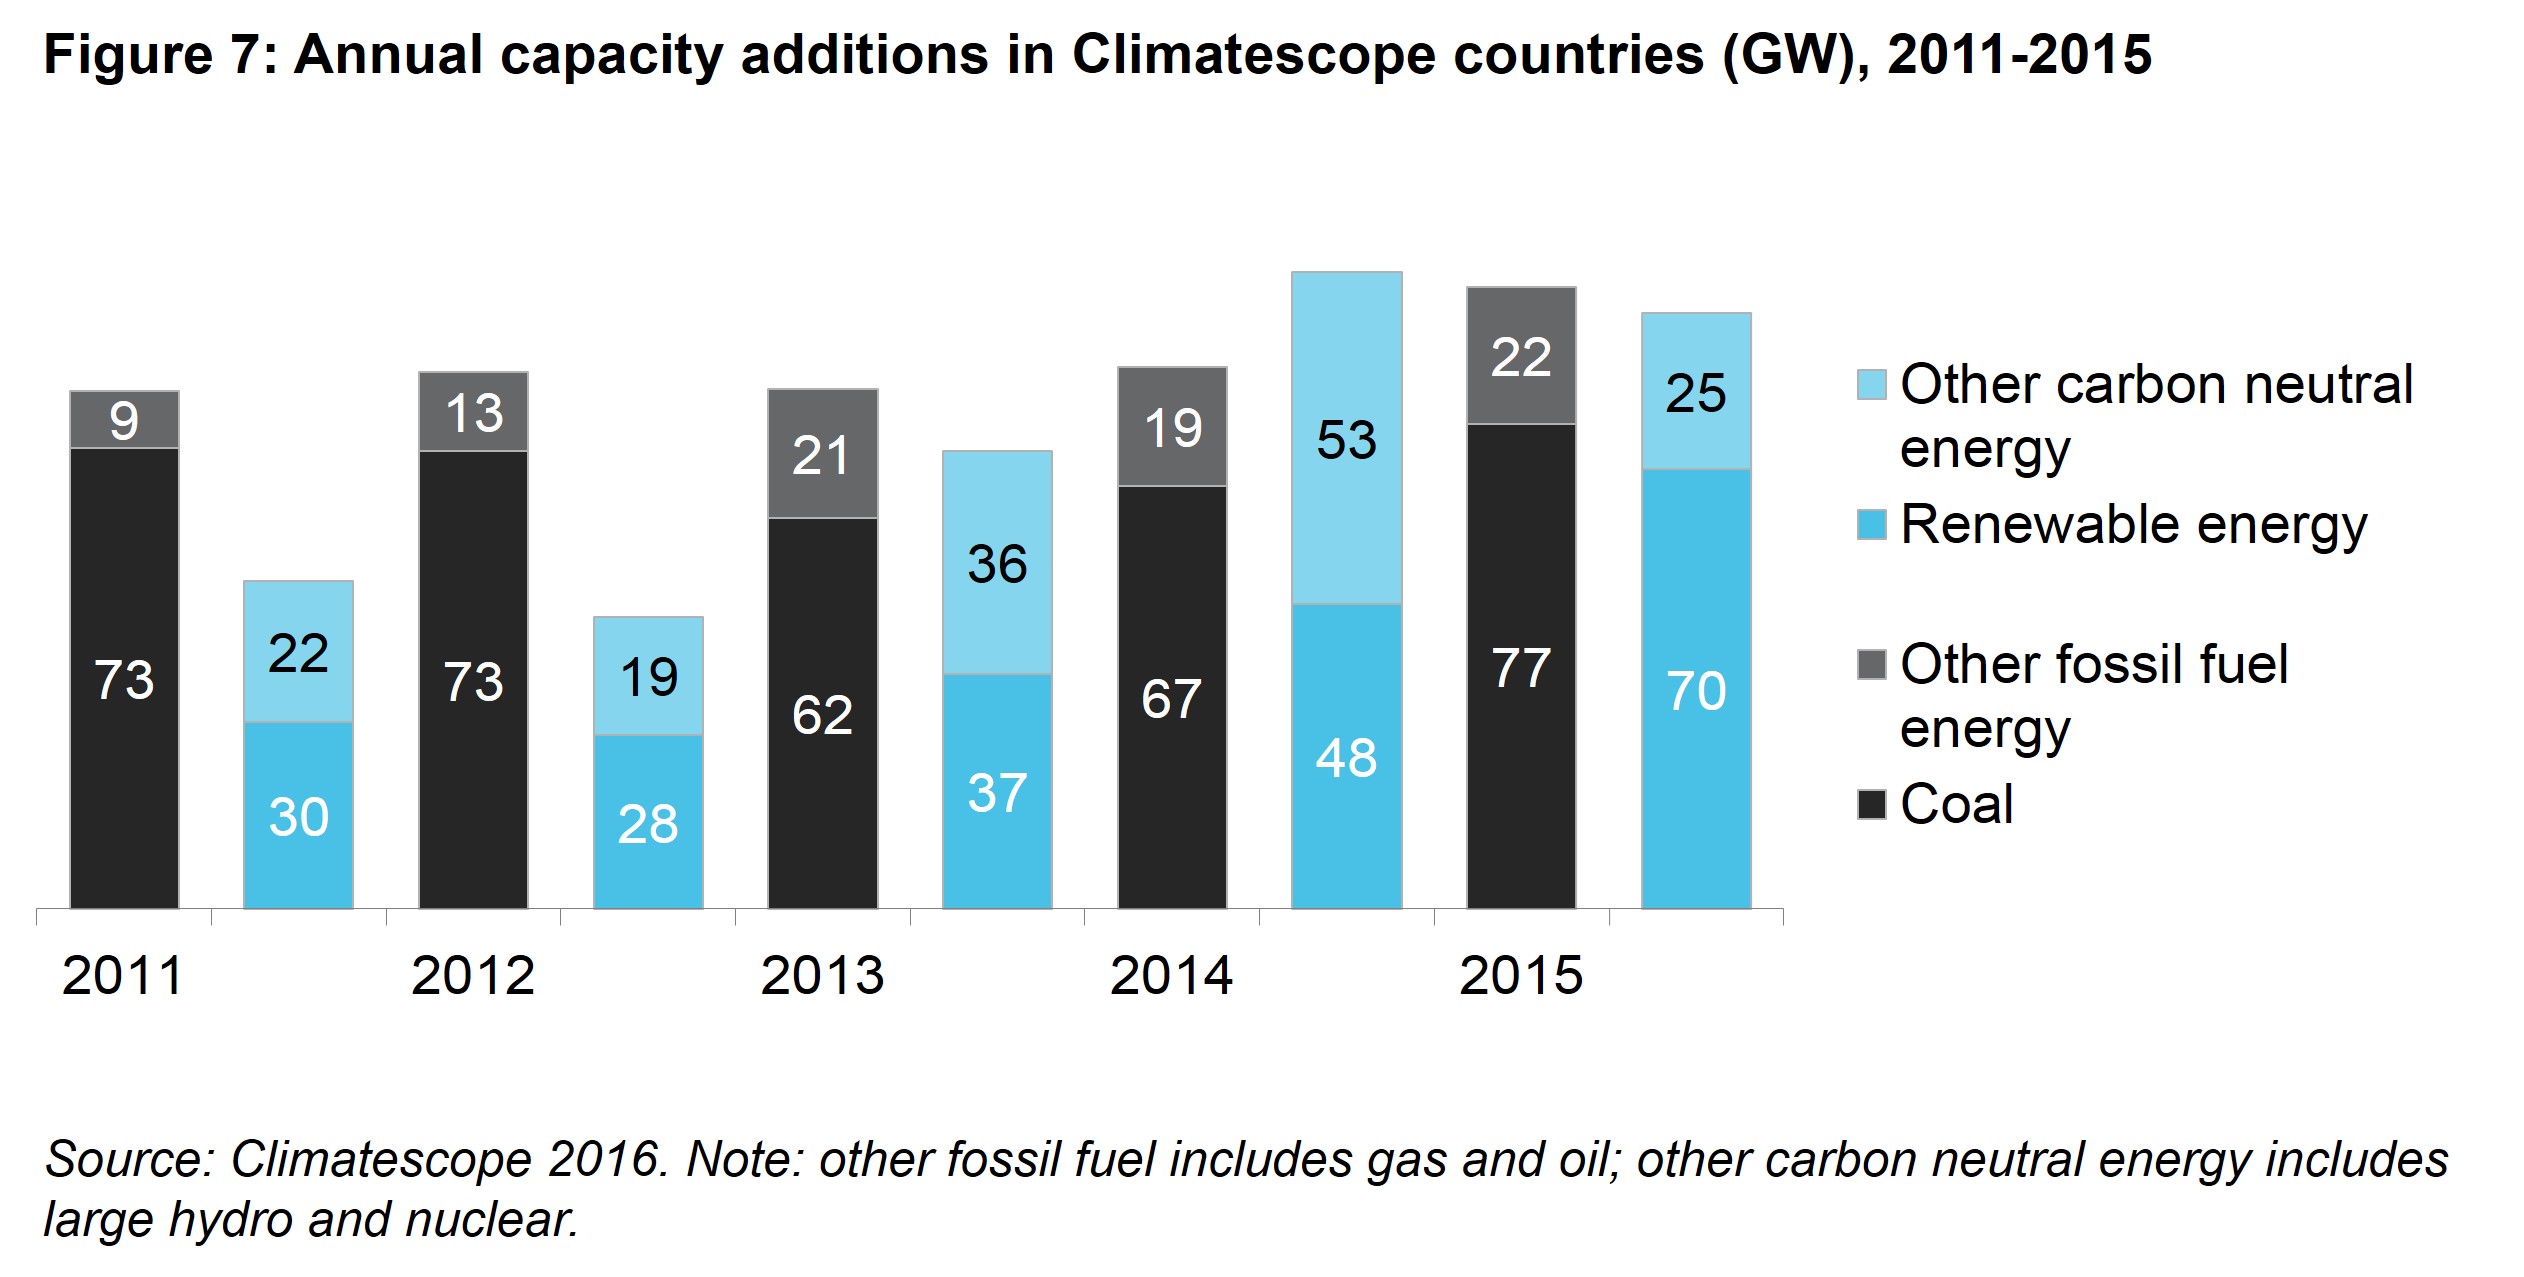 Executive Summary Fig 7 - Annual capacity additions in Climatescope countries (GW), 2011-2015